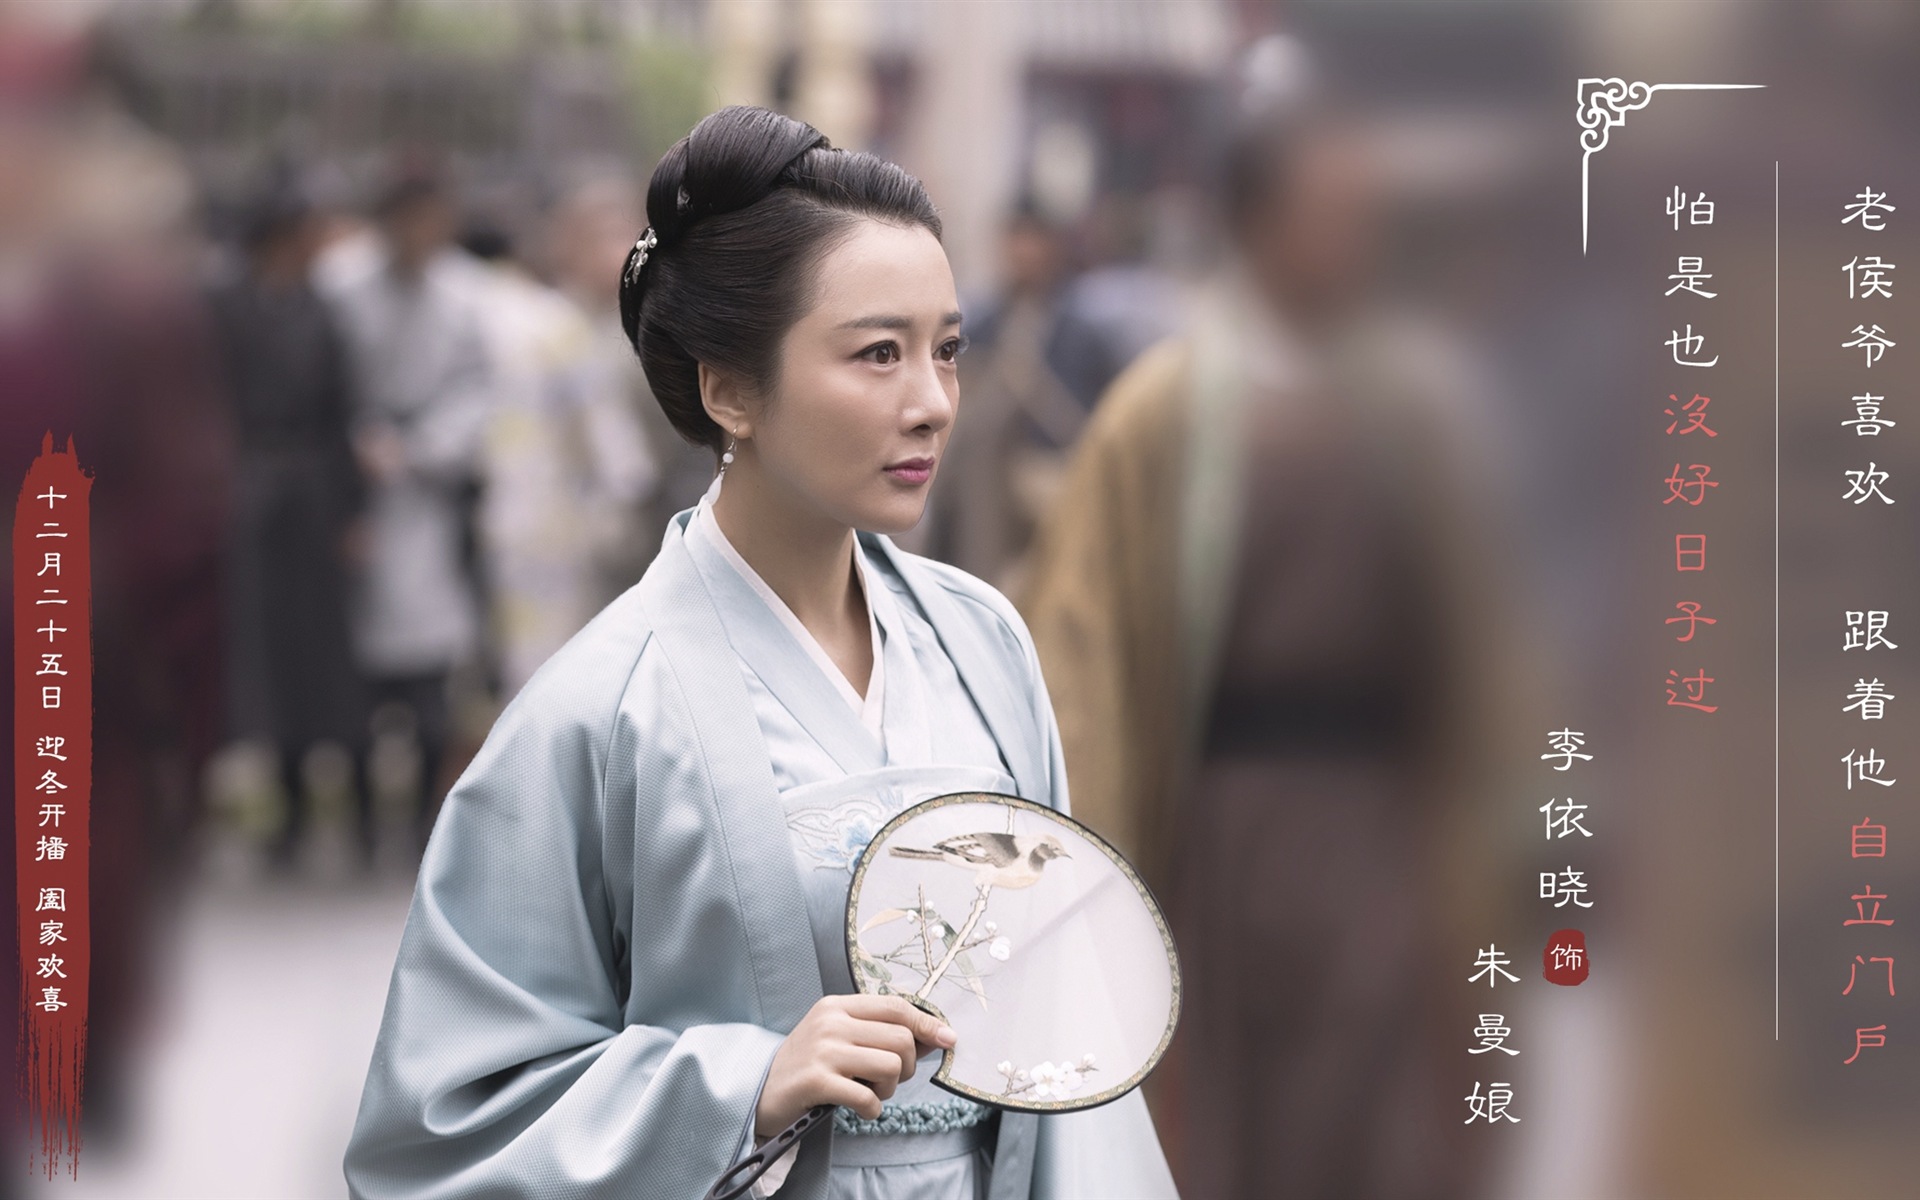 The Story Of MingLan, TV series HD wallpapers #34 - 1920x1200